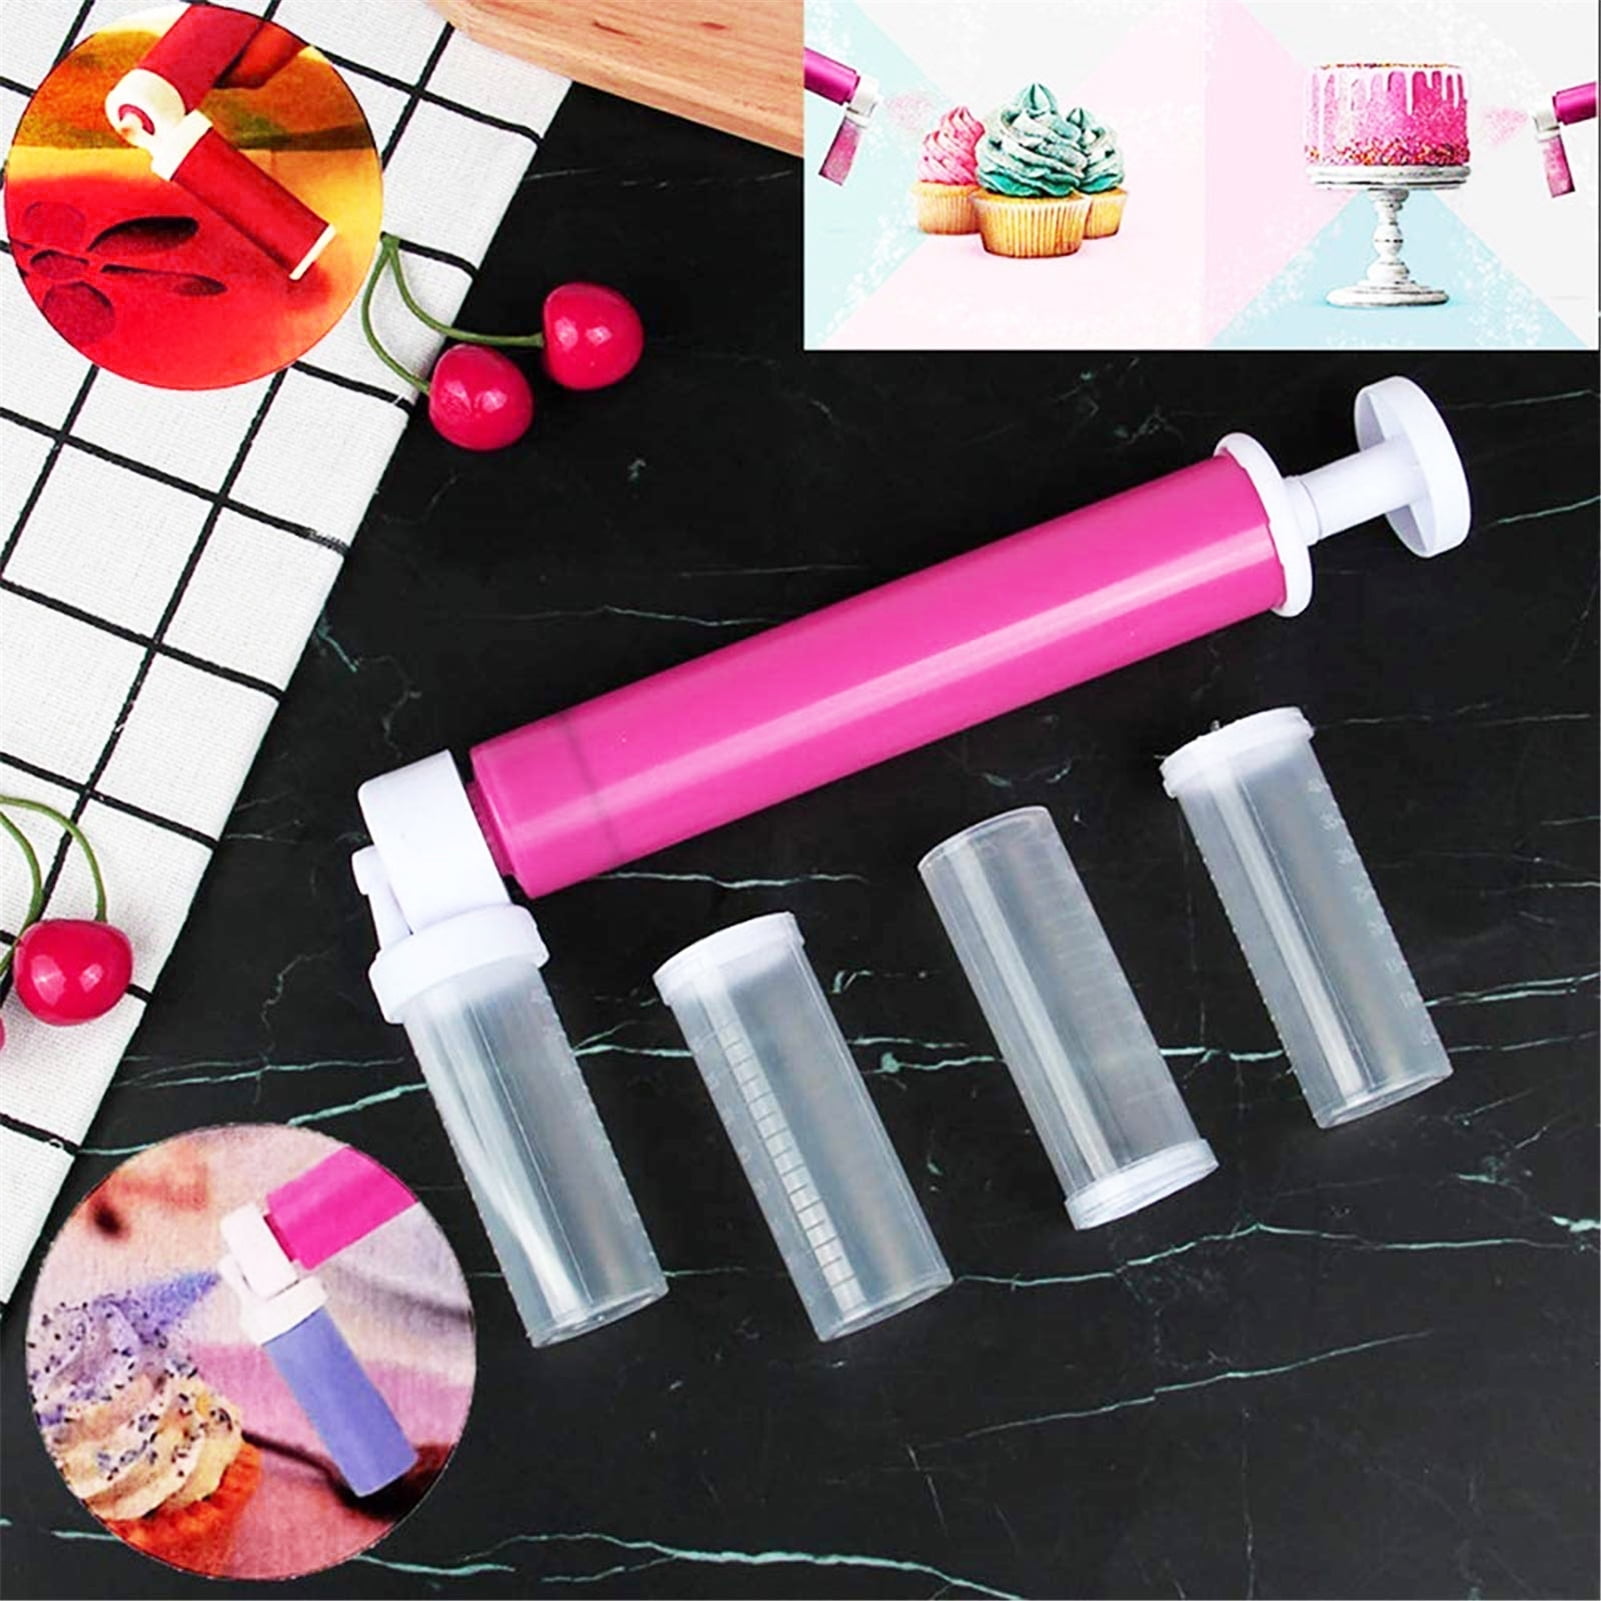 Cheers.US Manual Airbrush for Cake Glitter Decorating Tools, Durable and  Easy to Clean DIY Cake Airbrush makeup kit with 4 Pcs Vial, Glitter Pump  for Cakes, Cupcakes and Desserts Decorating 